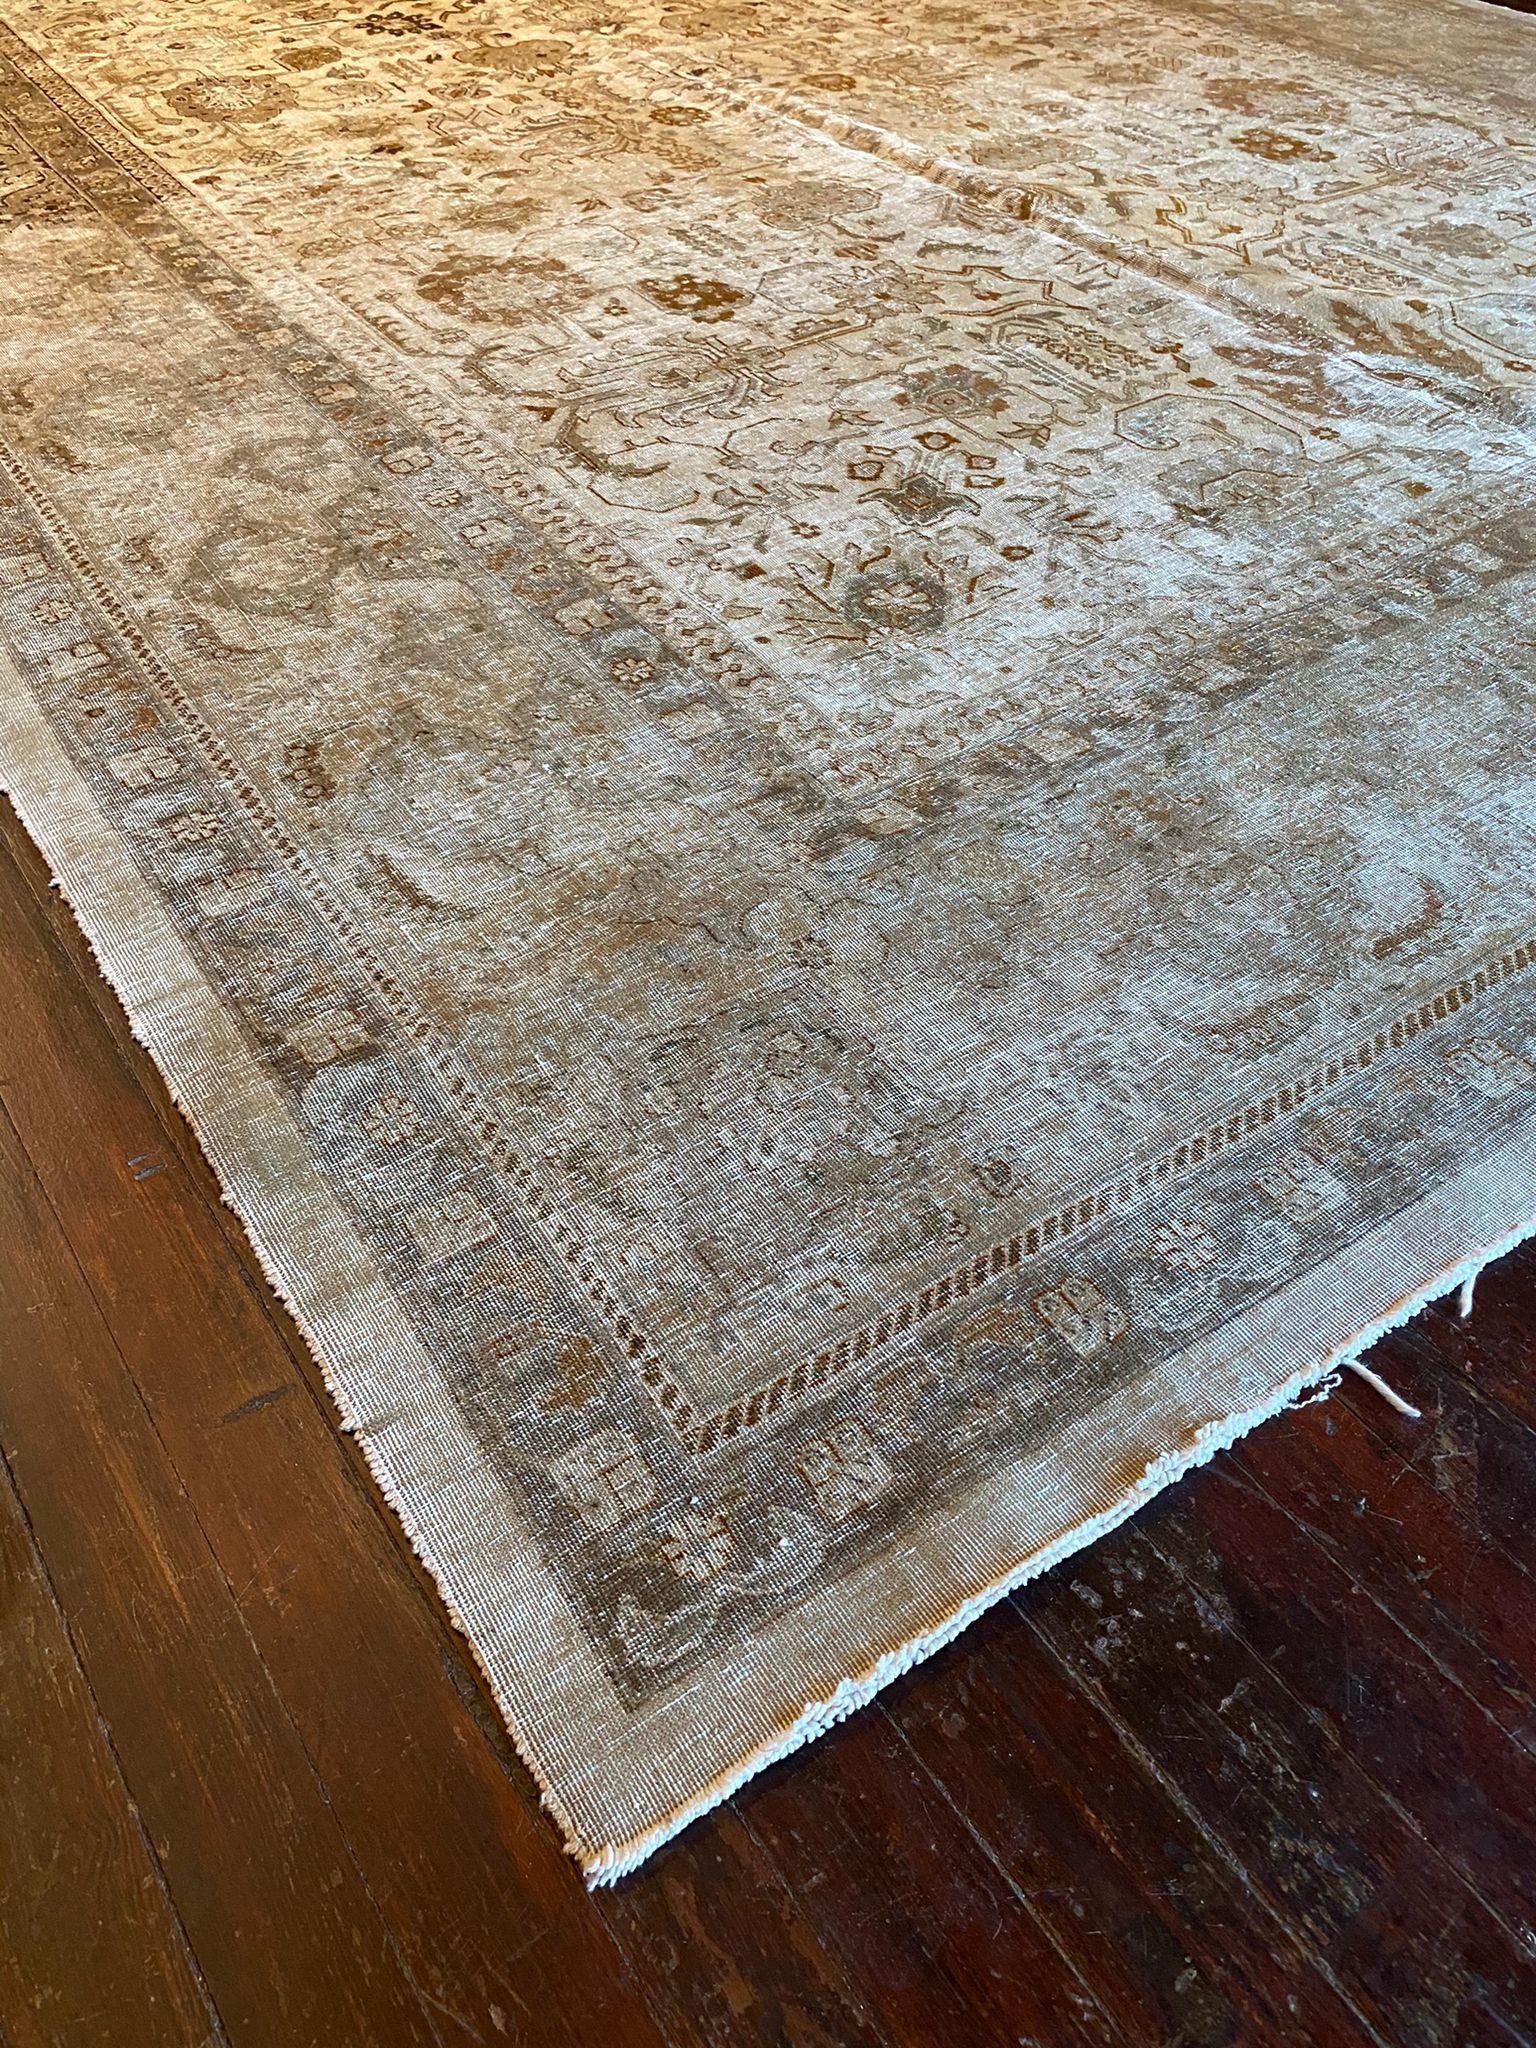 Tabriz rugs are known for their intricate designs and superb quality, and this particular piece showcases a muted yet elegant color palette that exudes sophistication and timeless beauty. Here's a detailed description of this exquisite